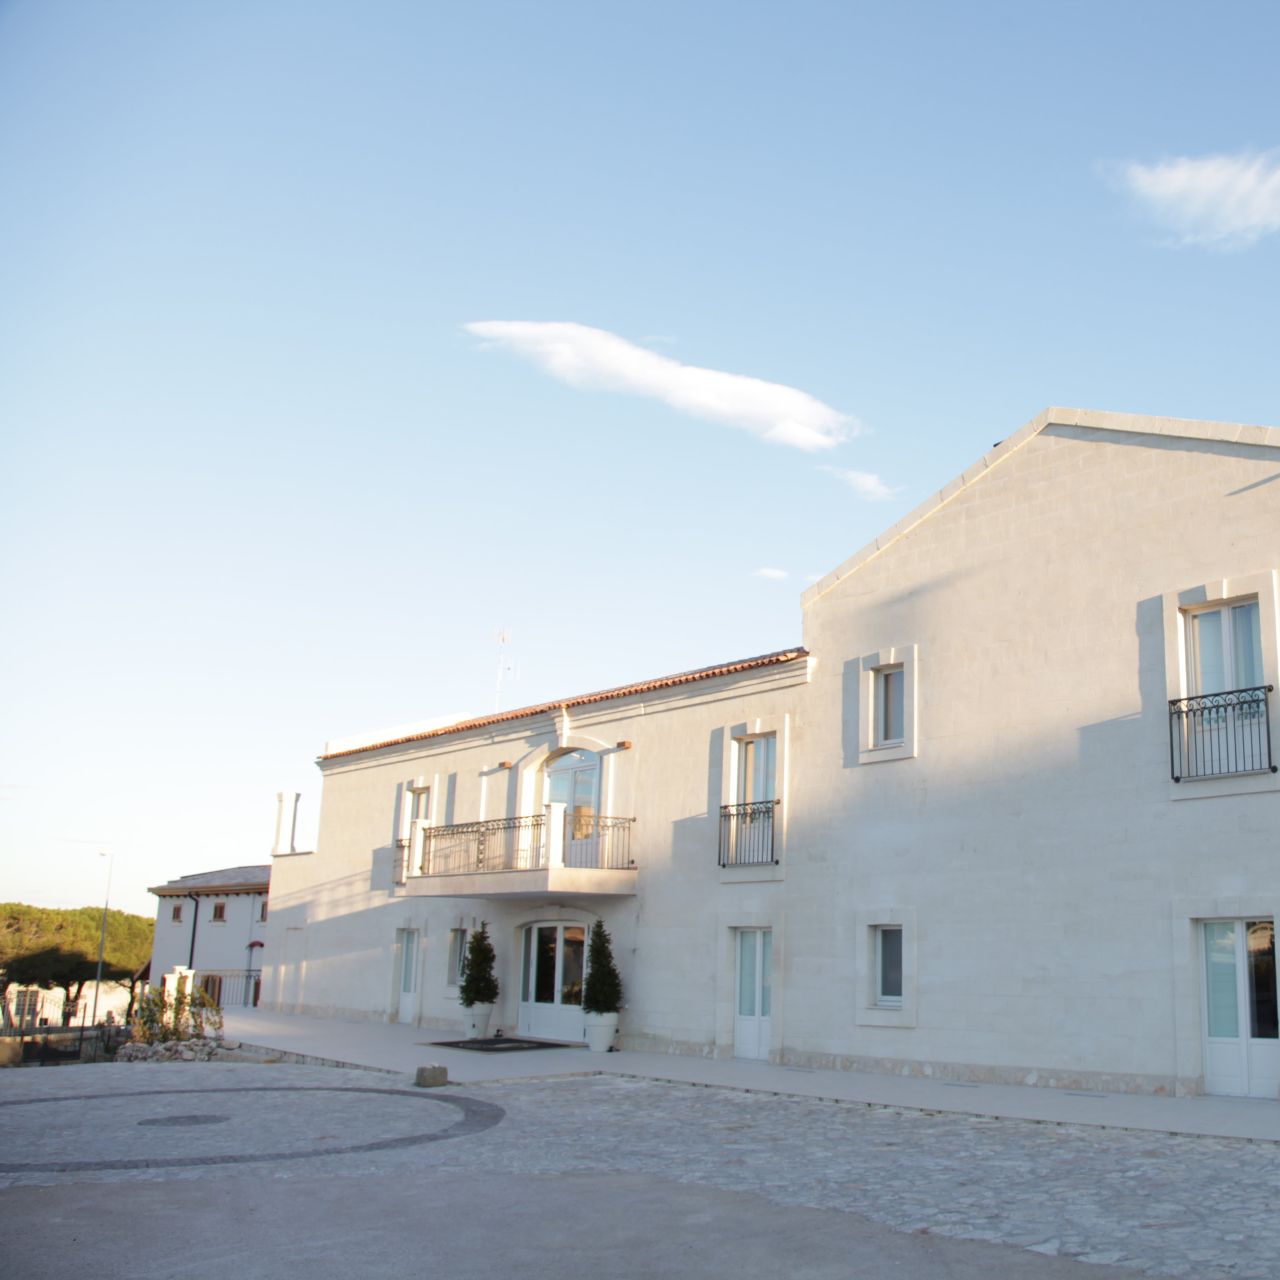 Cave del Sole Hotel Residence - Matera - HOTEL INFO